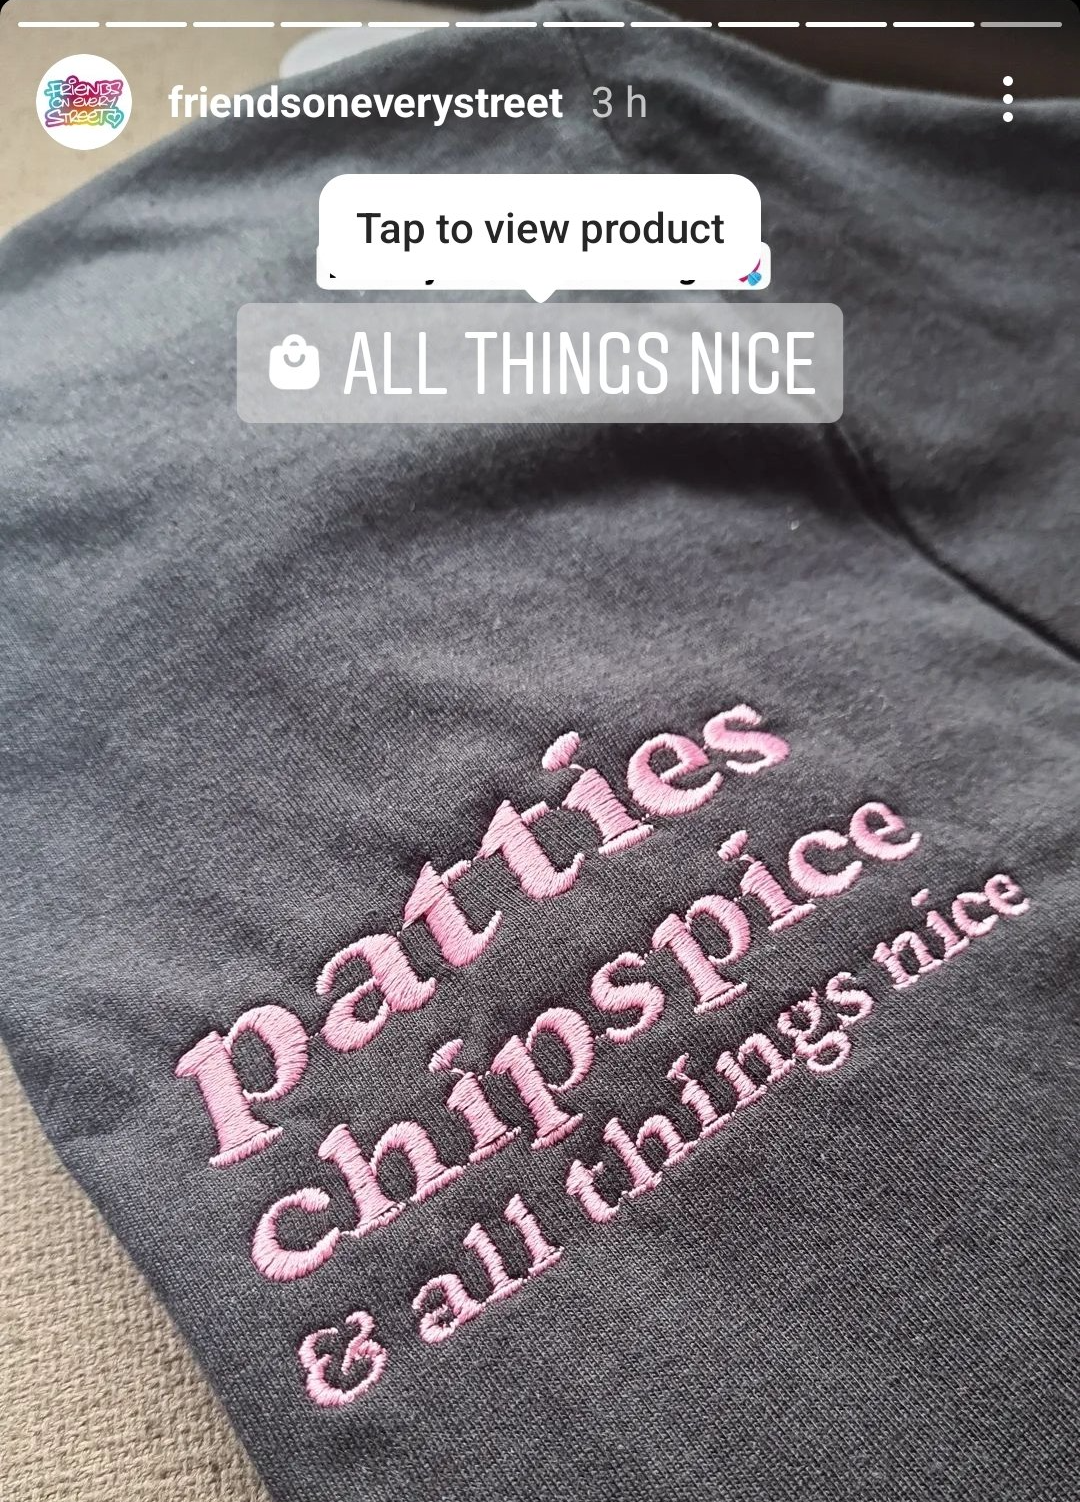 a screenshot from an Instagram story that has a product link in it